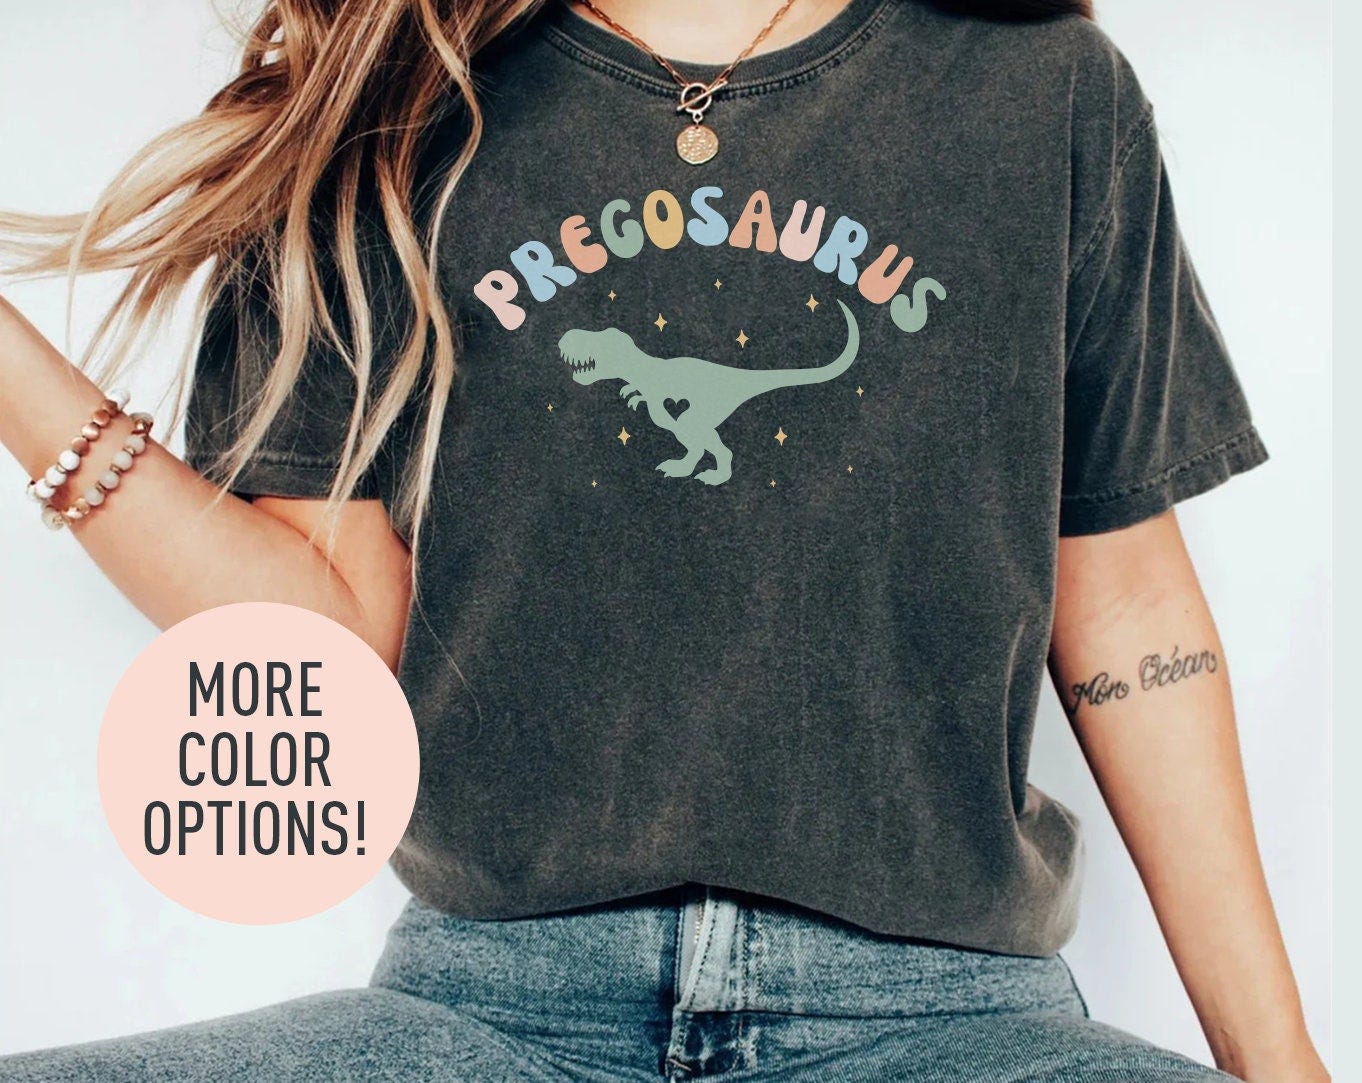 Pregnancy Announcement Shirt for Women, Funny Pregosaurus TShirt for Baby Shower, Funny Gift for Expecting Mom Shirt for Baby Announcement